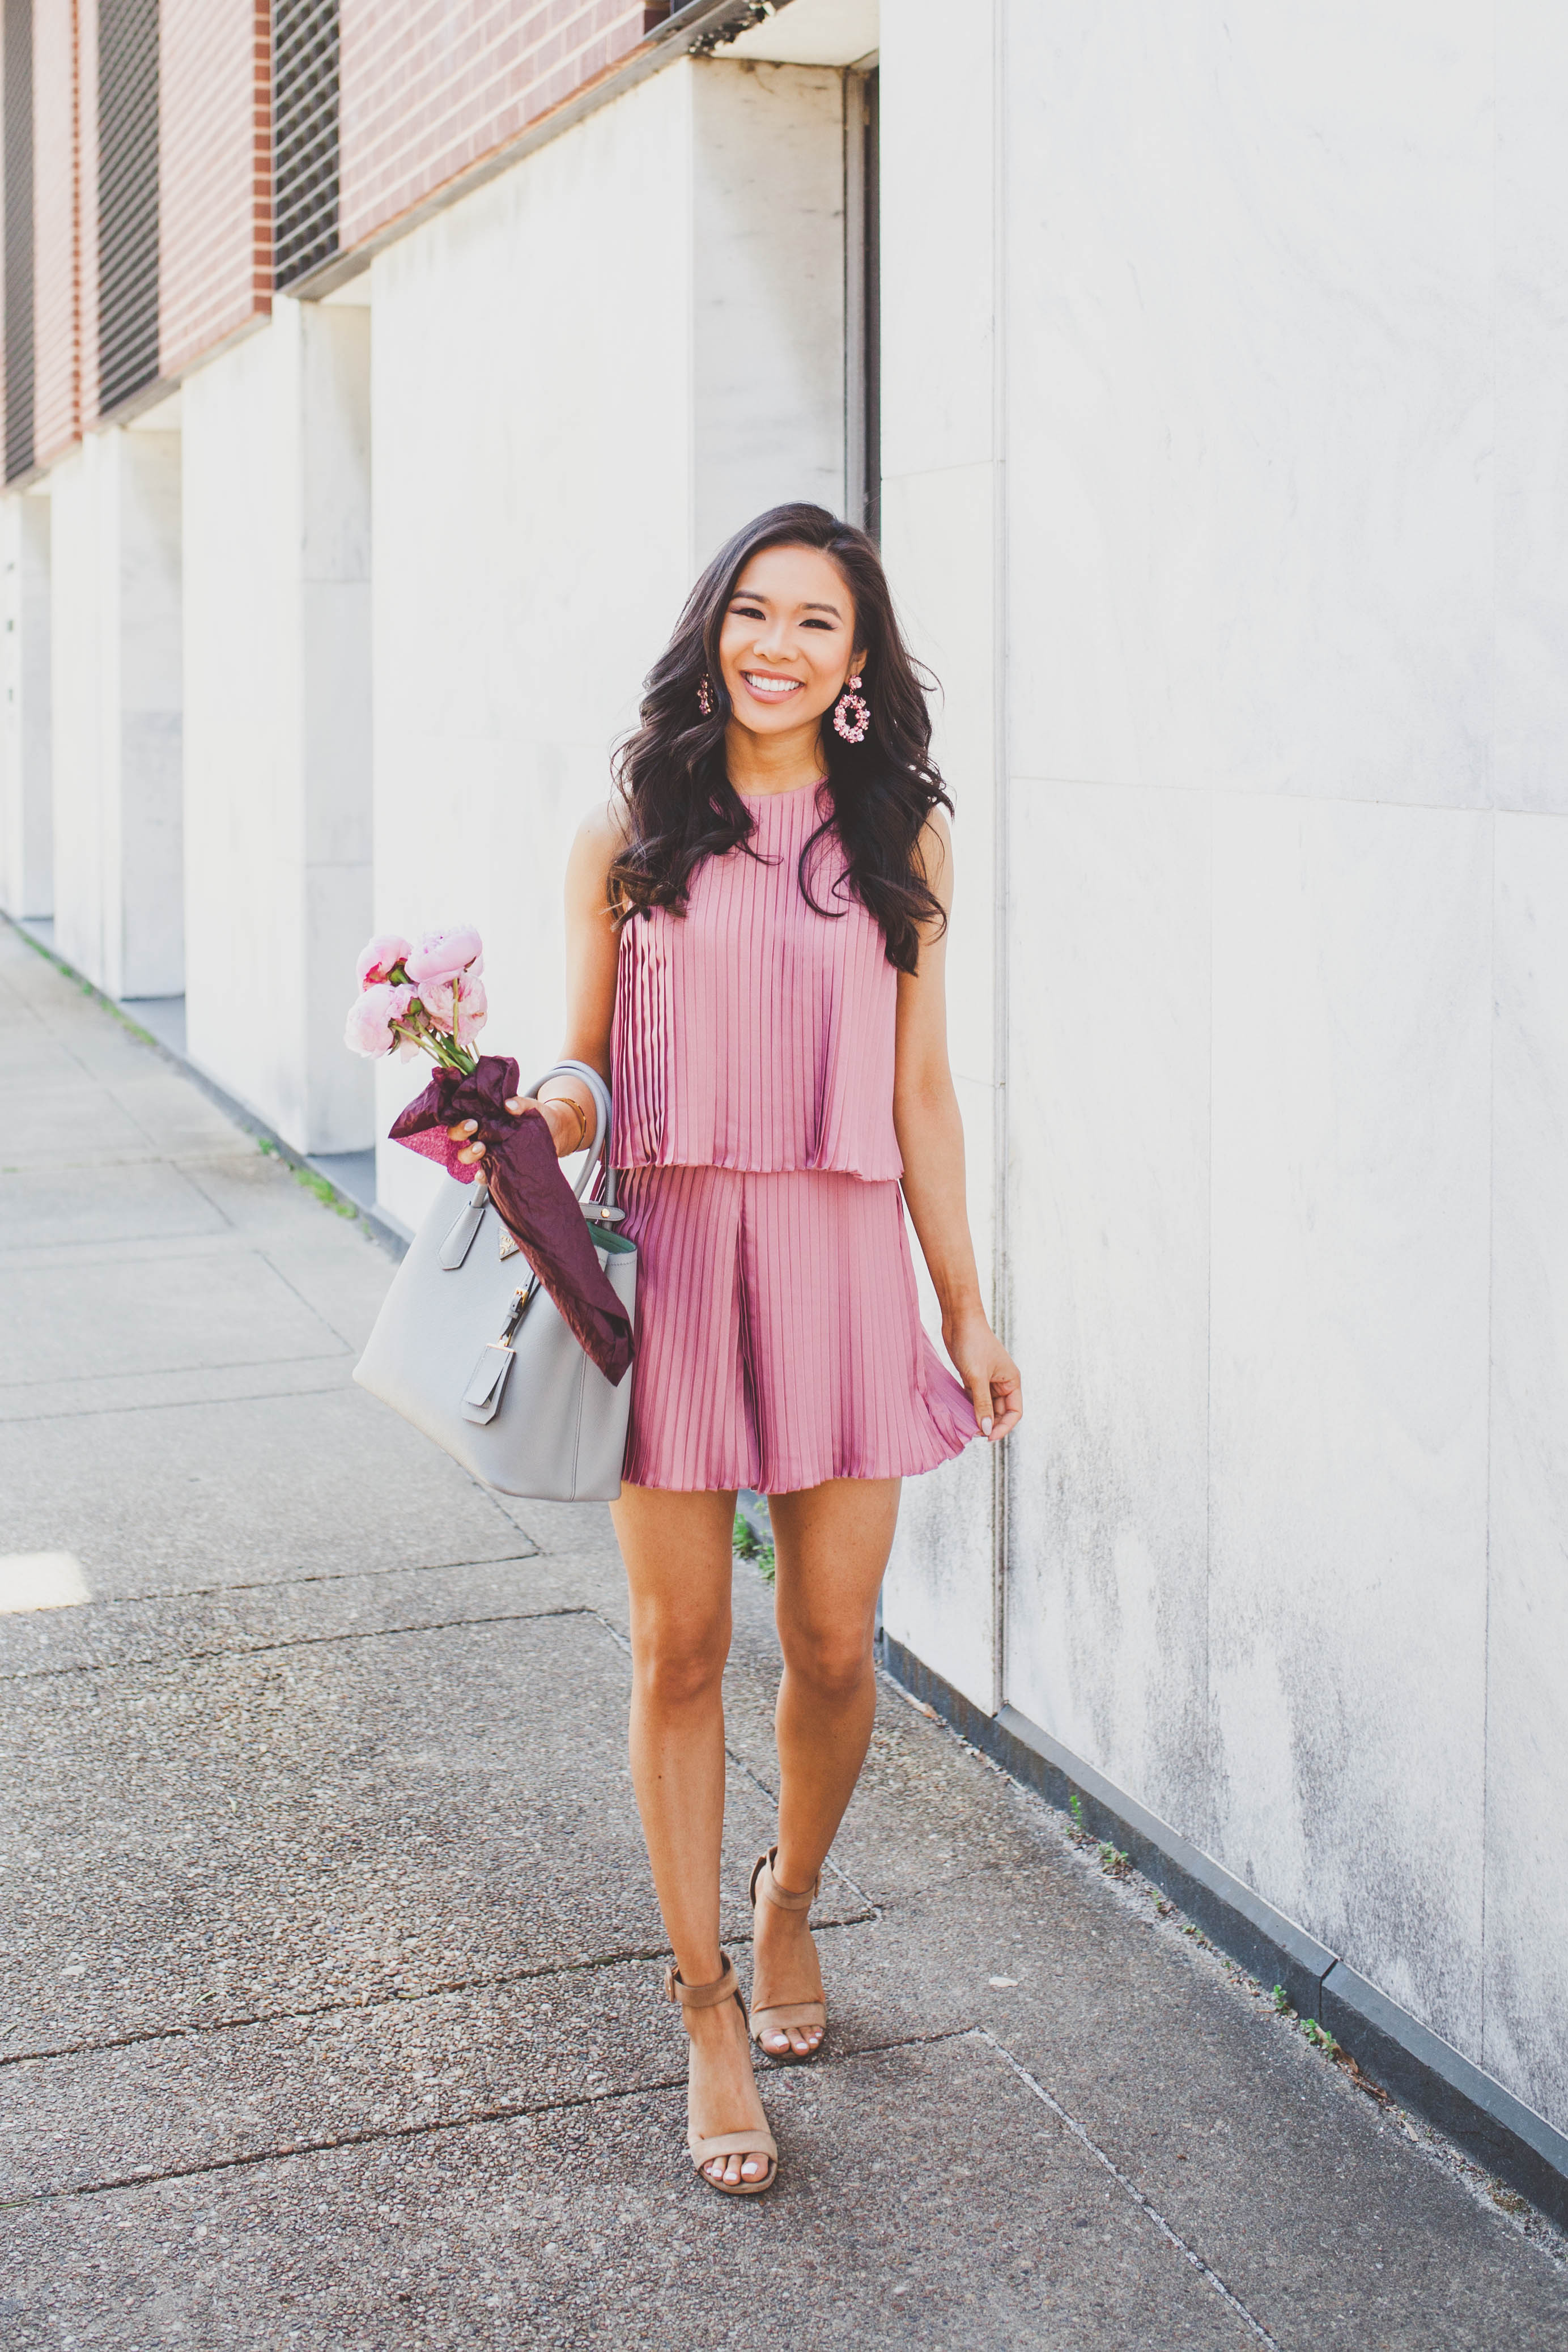 Blogger Hoang-Kim wears a pink pleated romper with suede block sandals and pink peonies